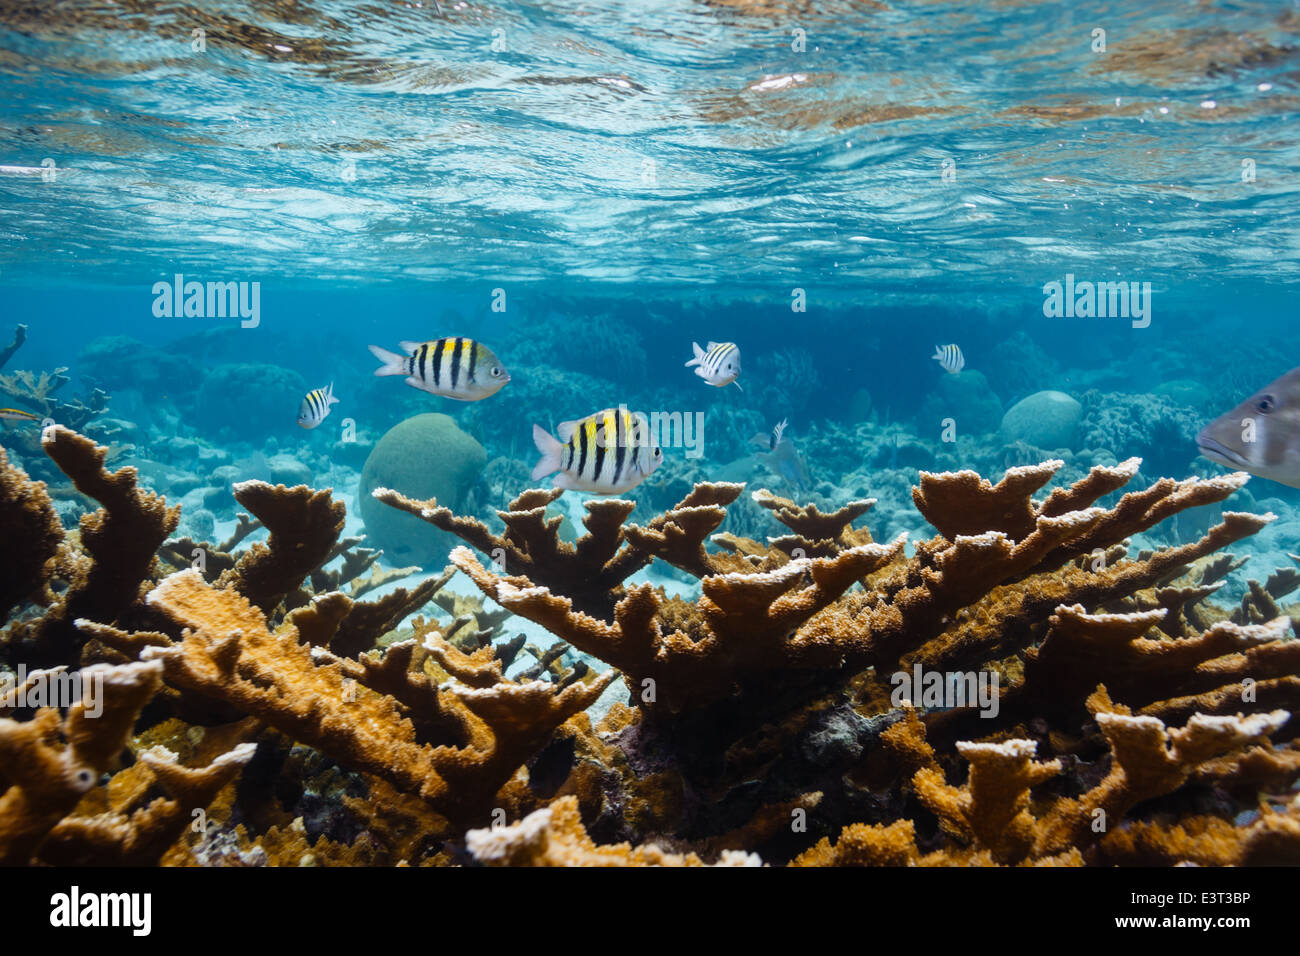 Black, white and yellow vertical striped Sergeant Major fish swim on coral reef in the Caribbean Stock Photo